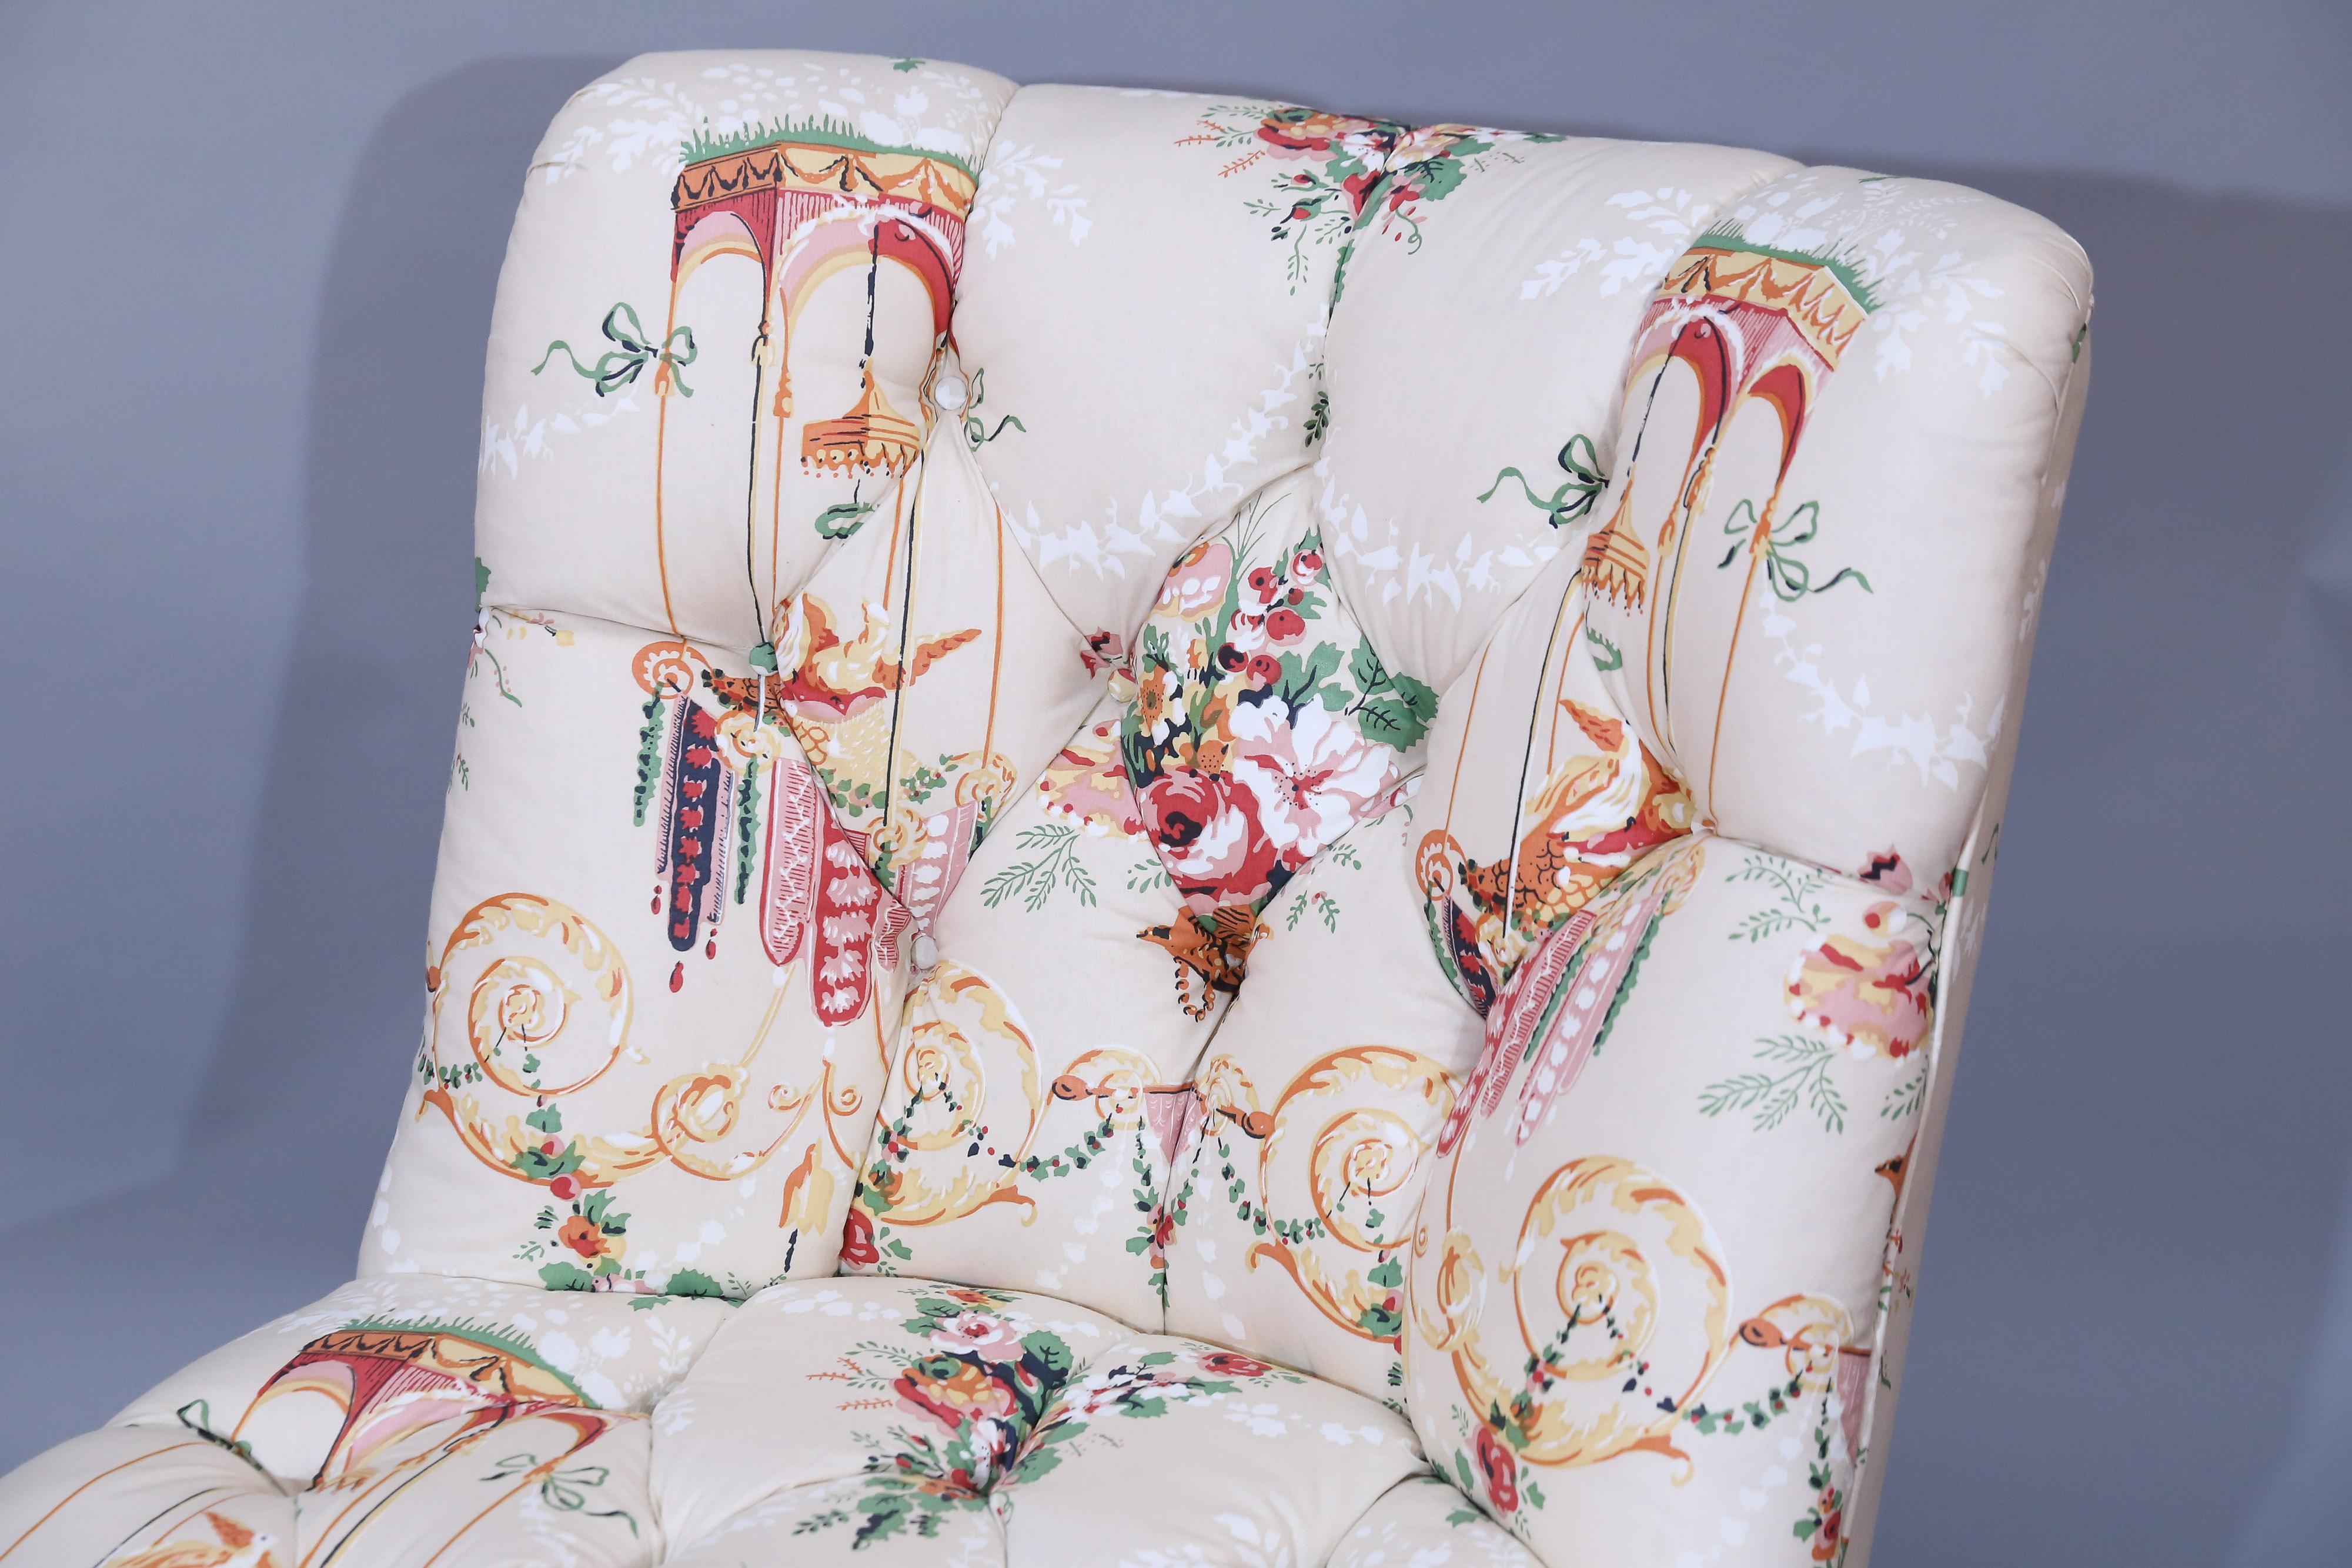 Sofa and Pair of Slipper Chairs in Floral Fabric In Excellent Condition For Sale In Houston, TX